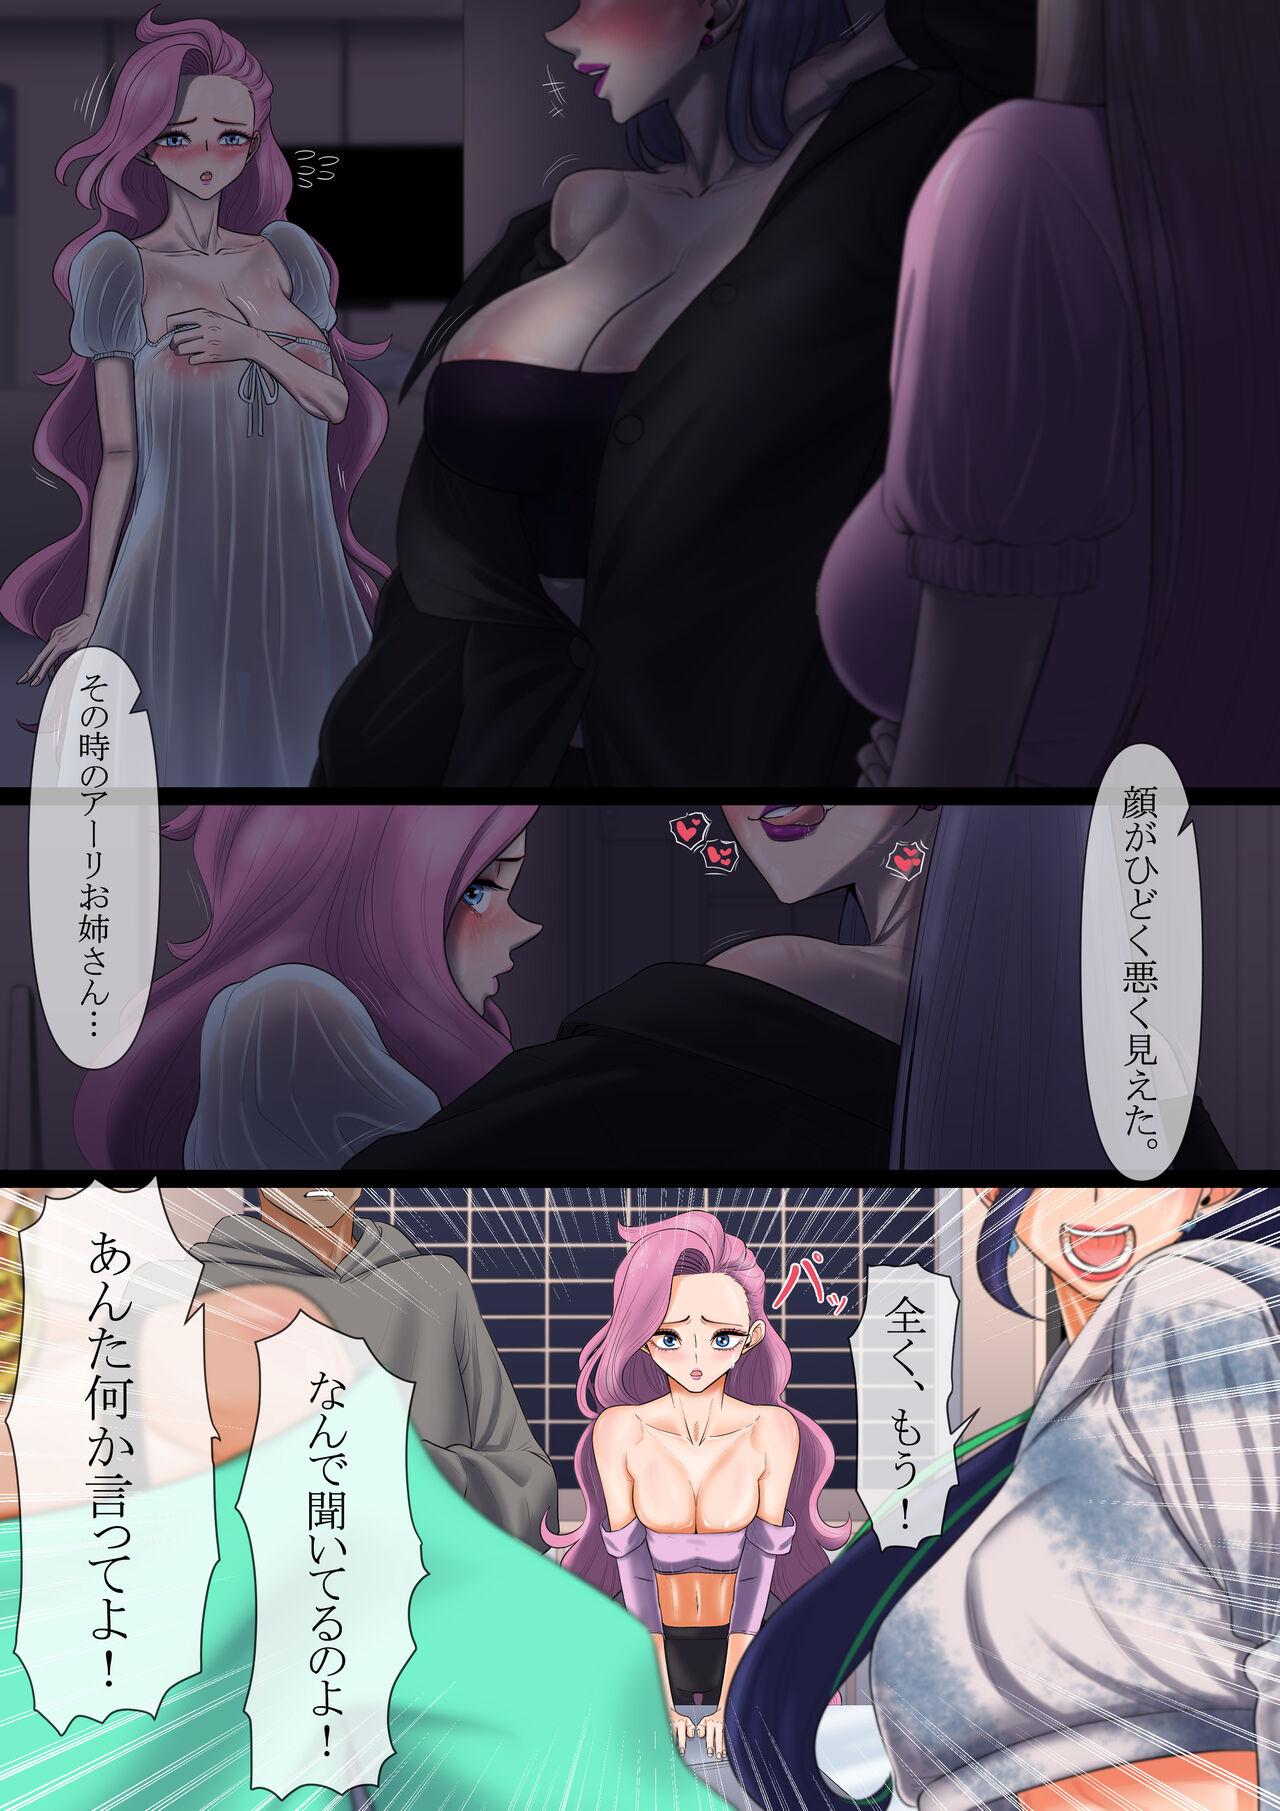 Horny 守りたいもの... - League of legends Family - Page 4